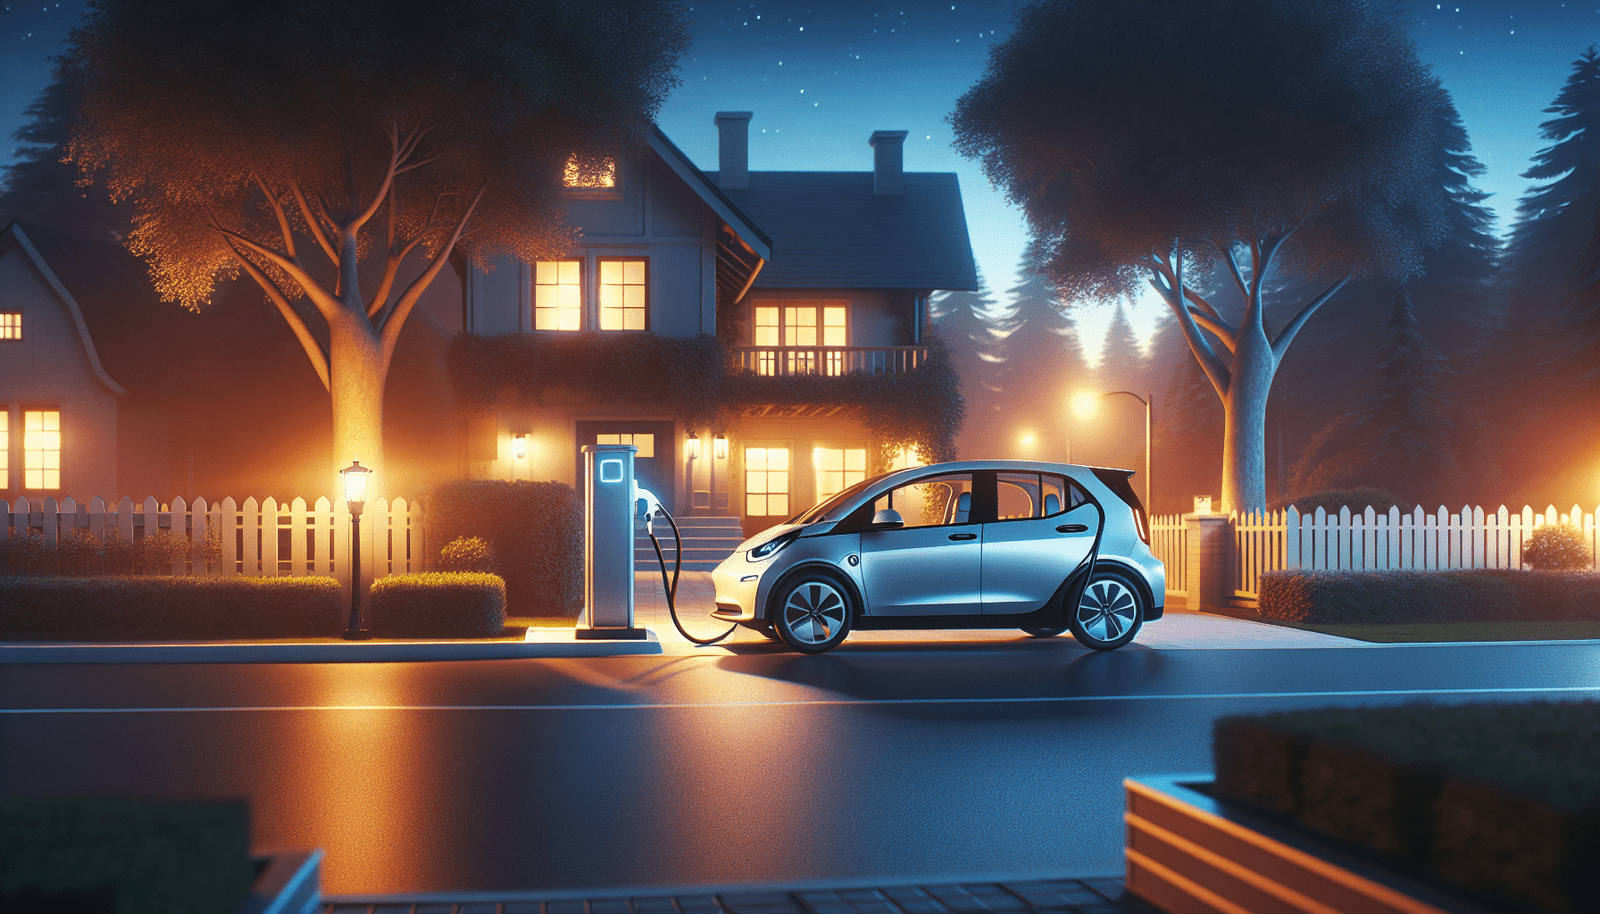 Are There Specific Policies For Electric Vehicle Charging In Residential Areas?